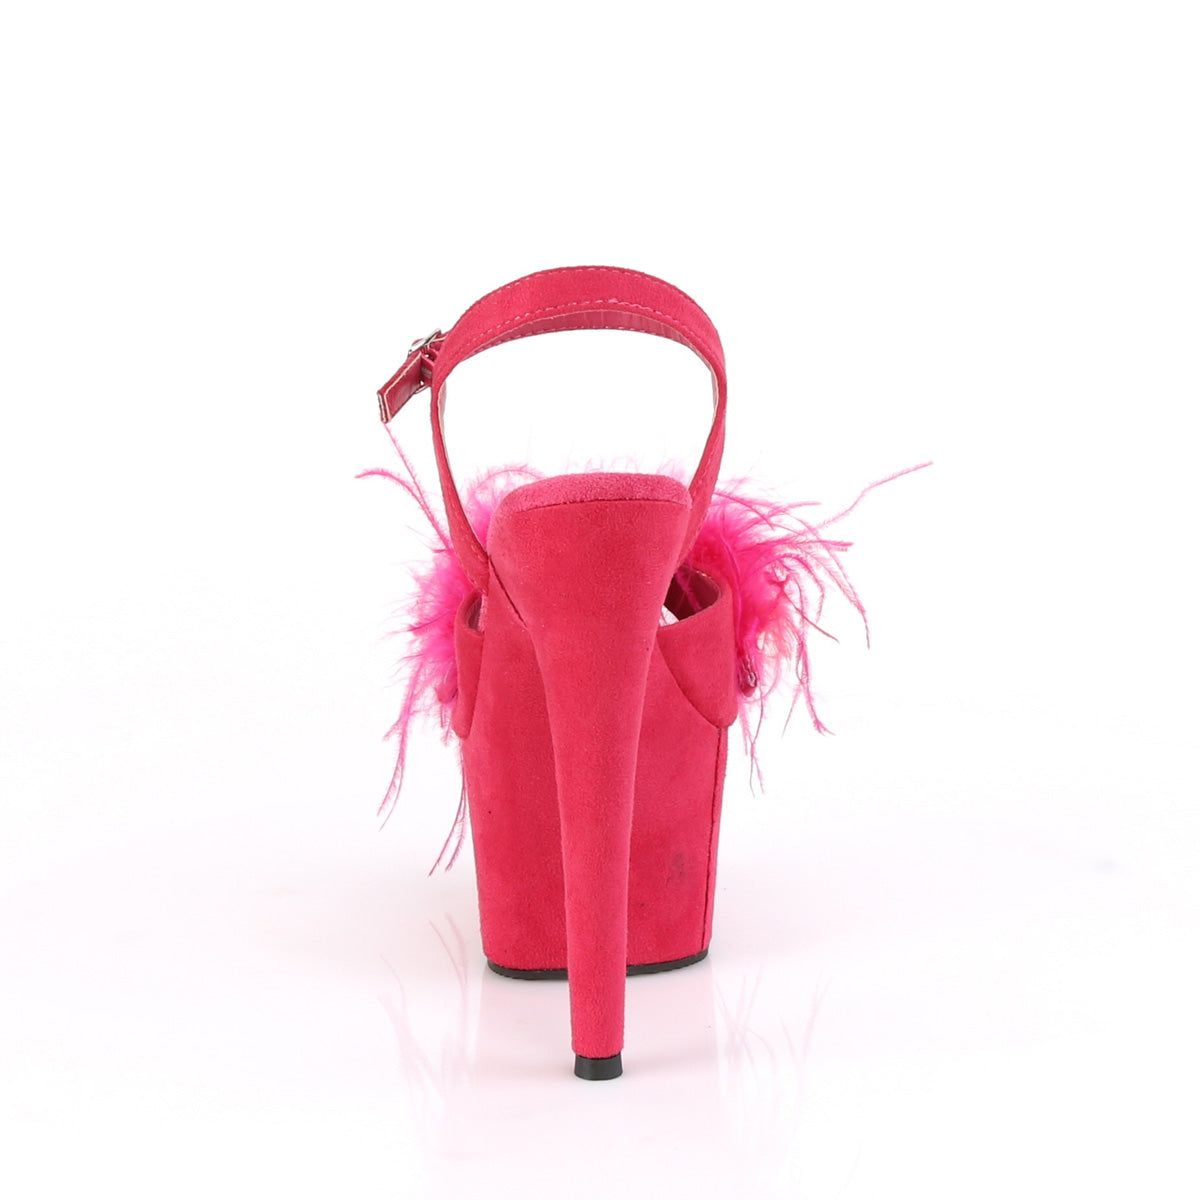 Pleaser Sandales pour femmes ADORE-709F H. Rose F.SueDe-Feather / h. Rose f.suedede